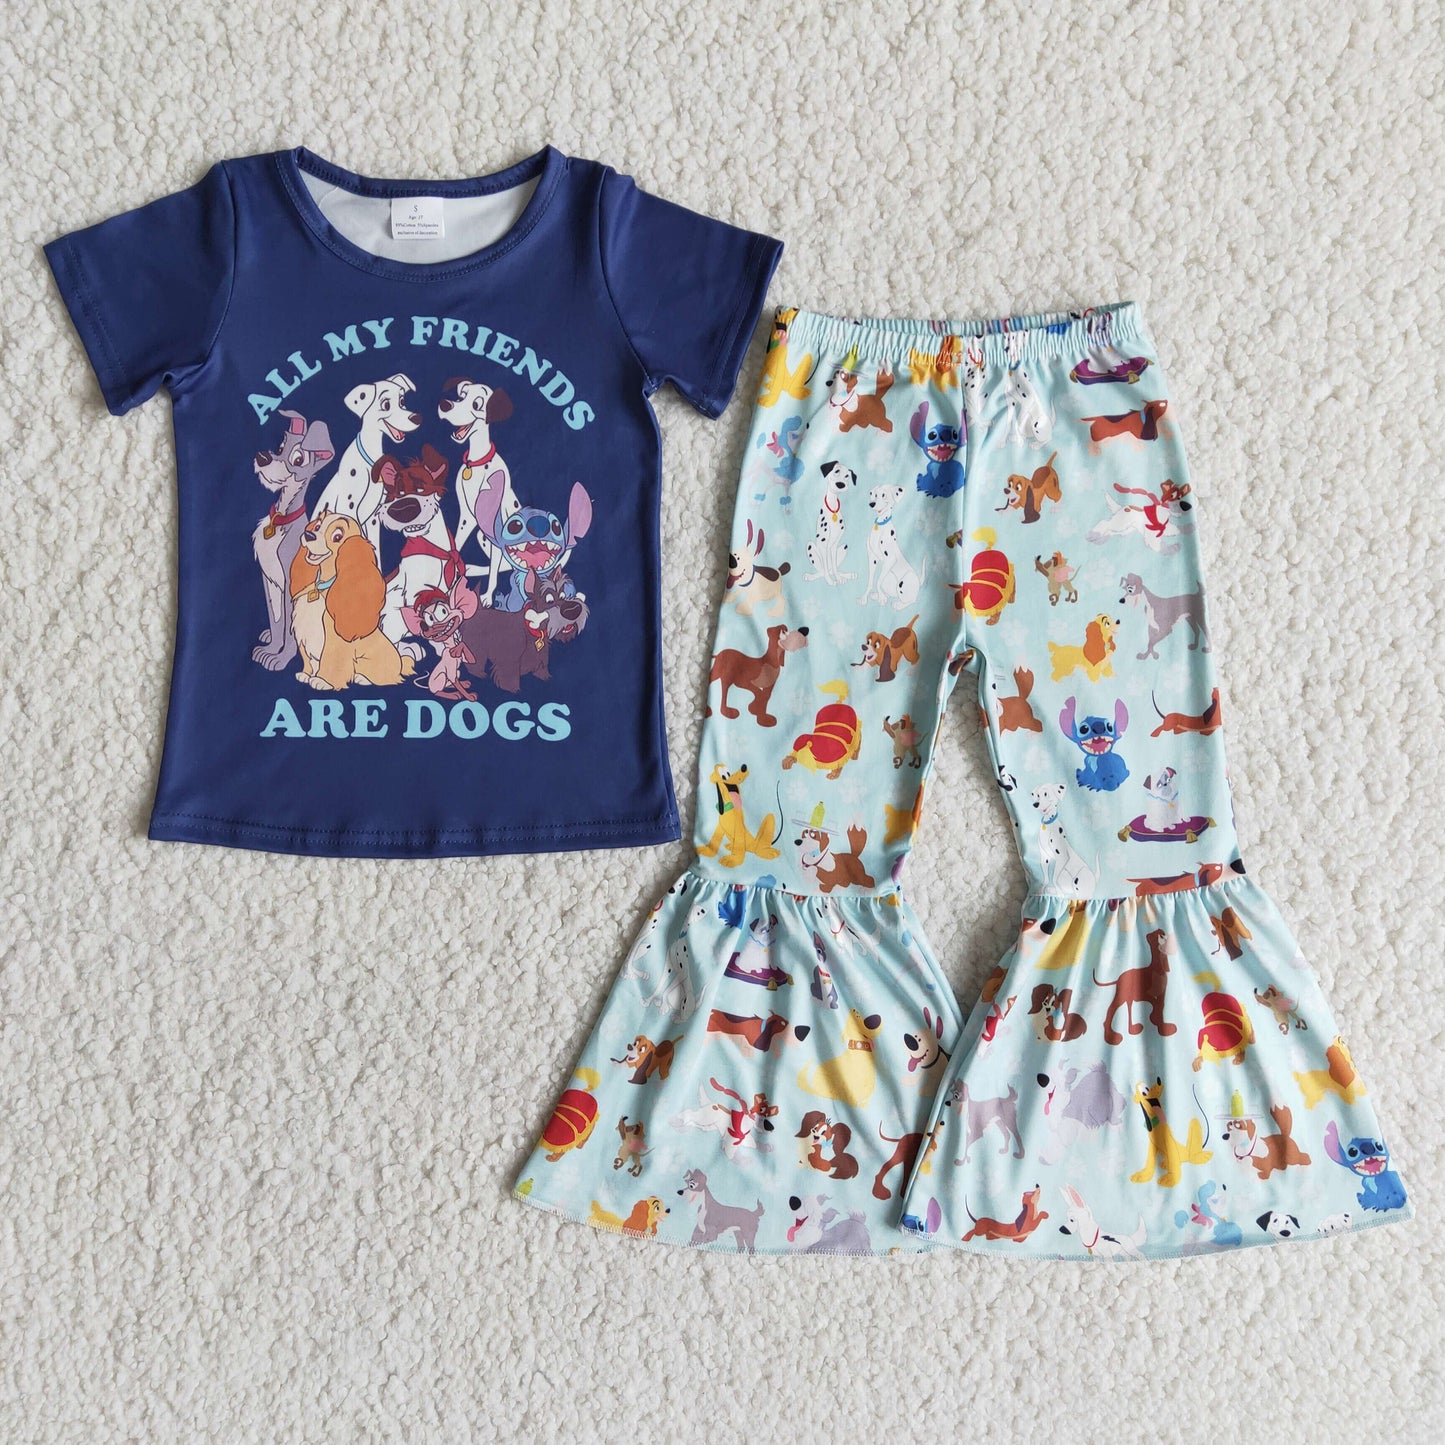 All my friends are dogs blue shirt bell bottom pants outfits kids boutique clothing